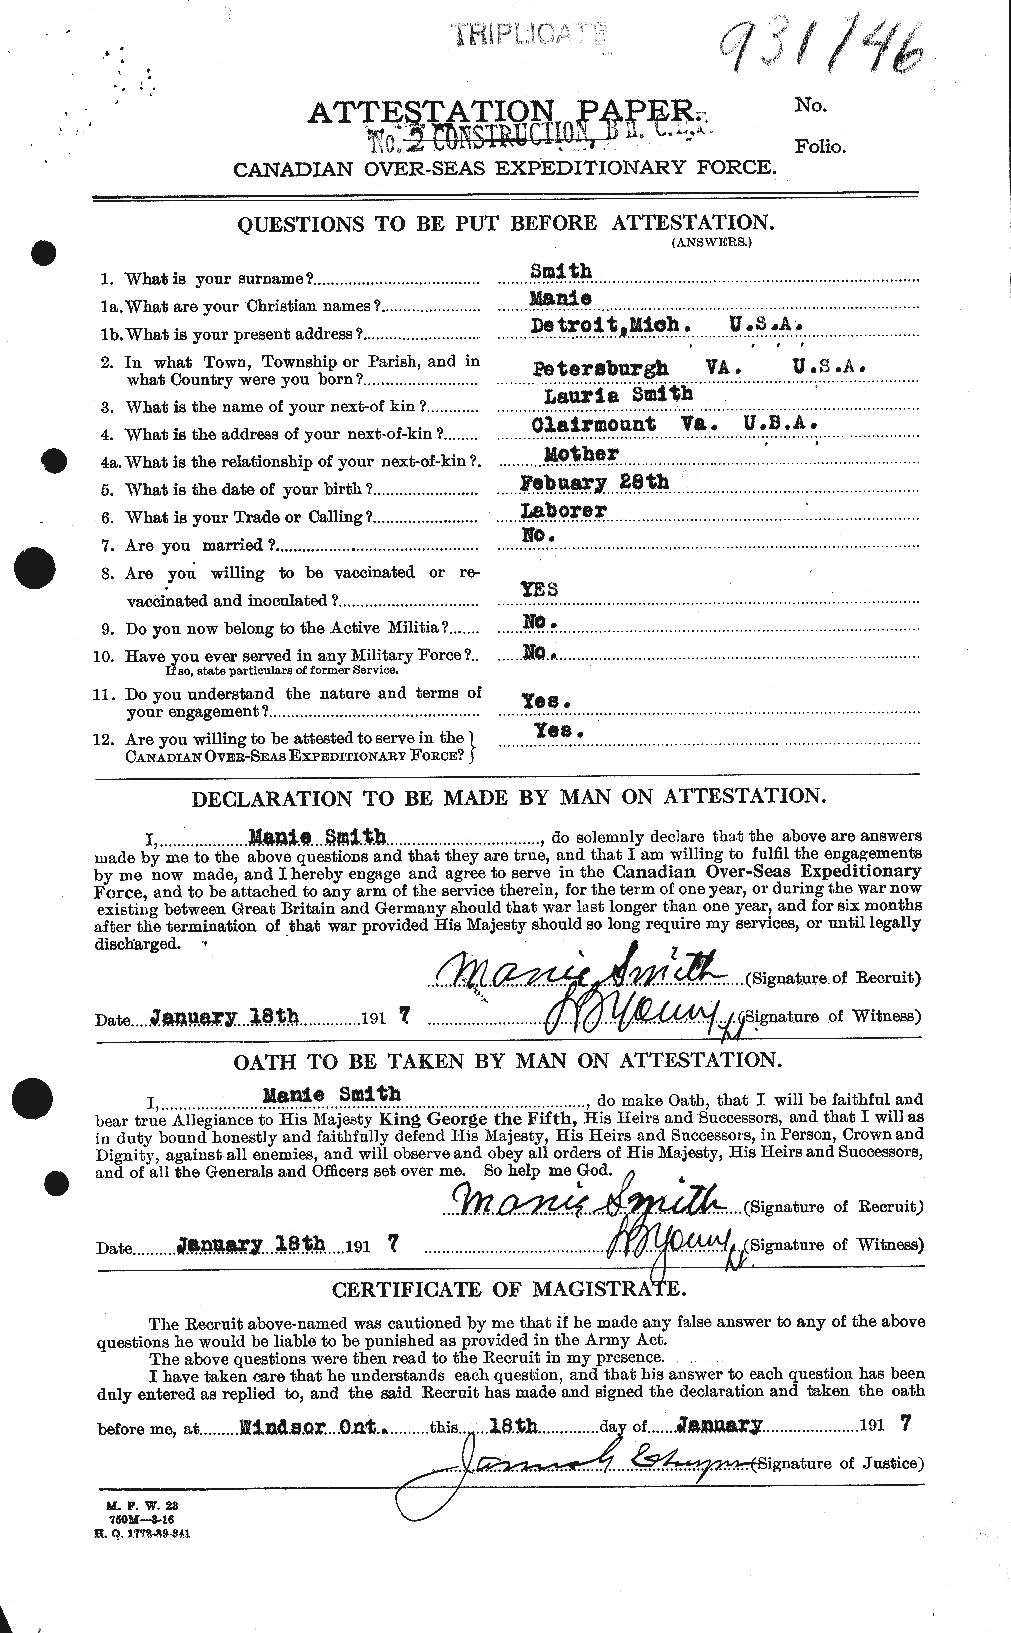 Personnel Records of the First World War - CEF 104792a